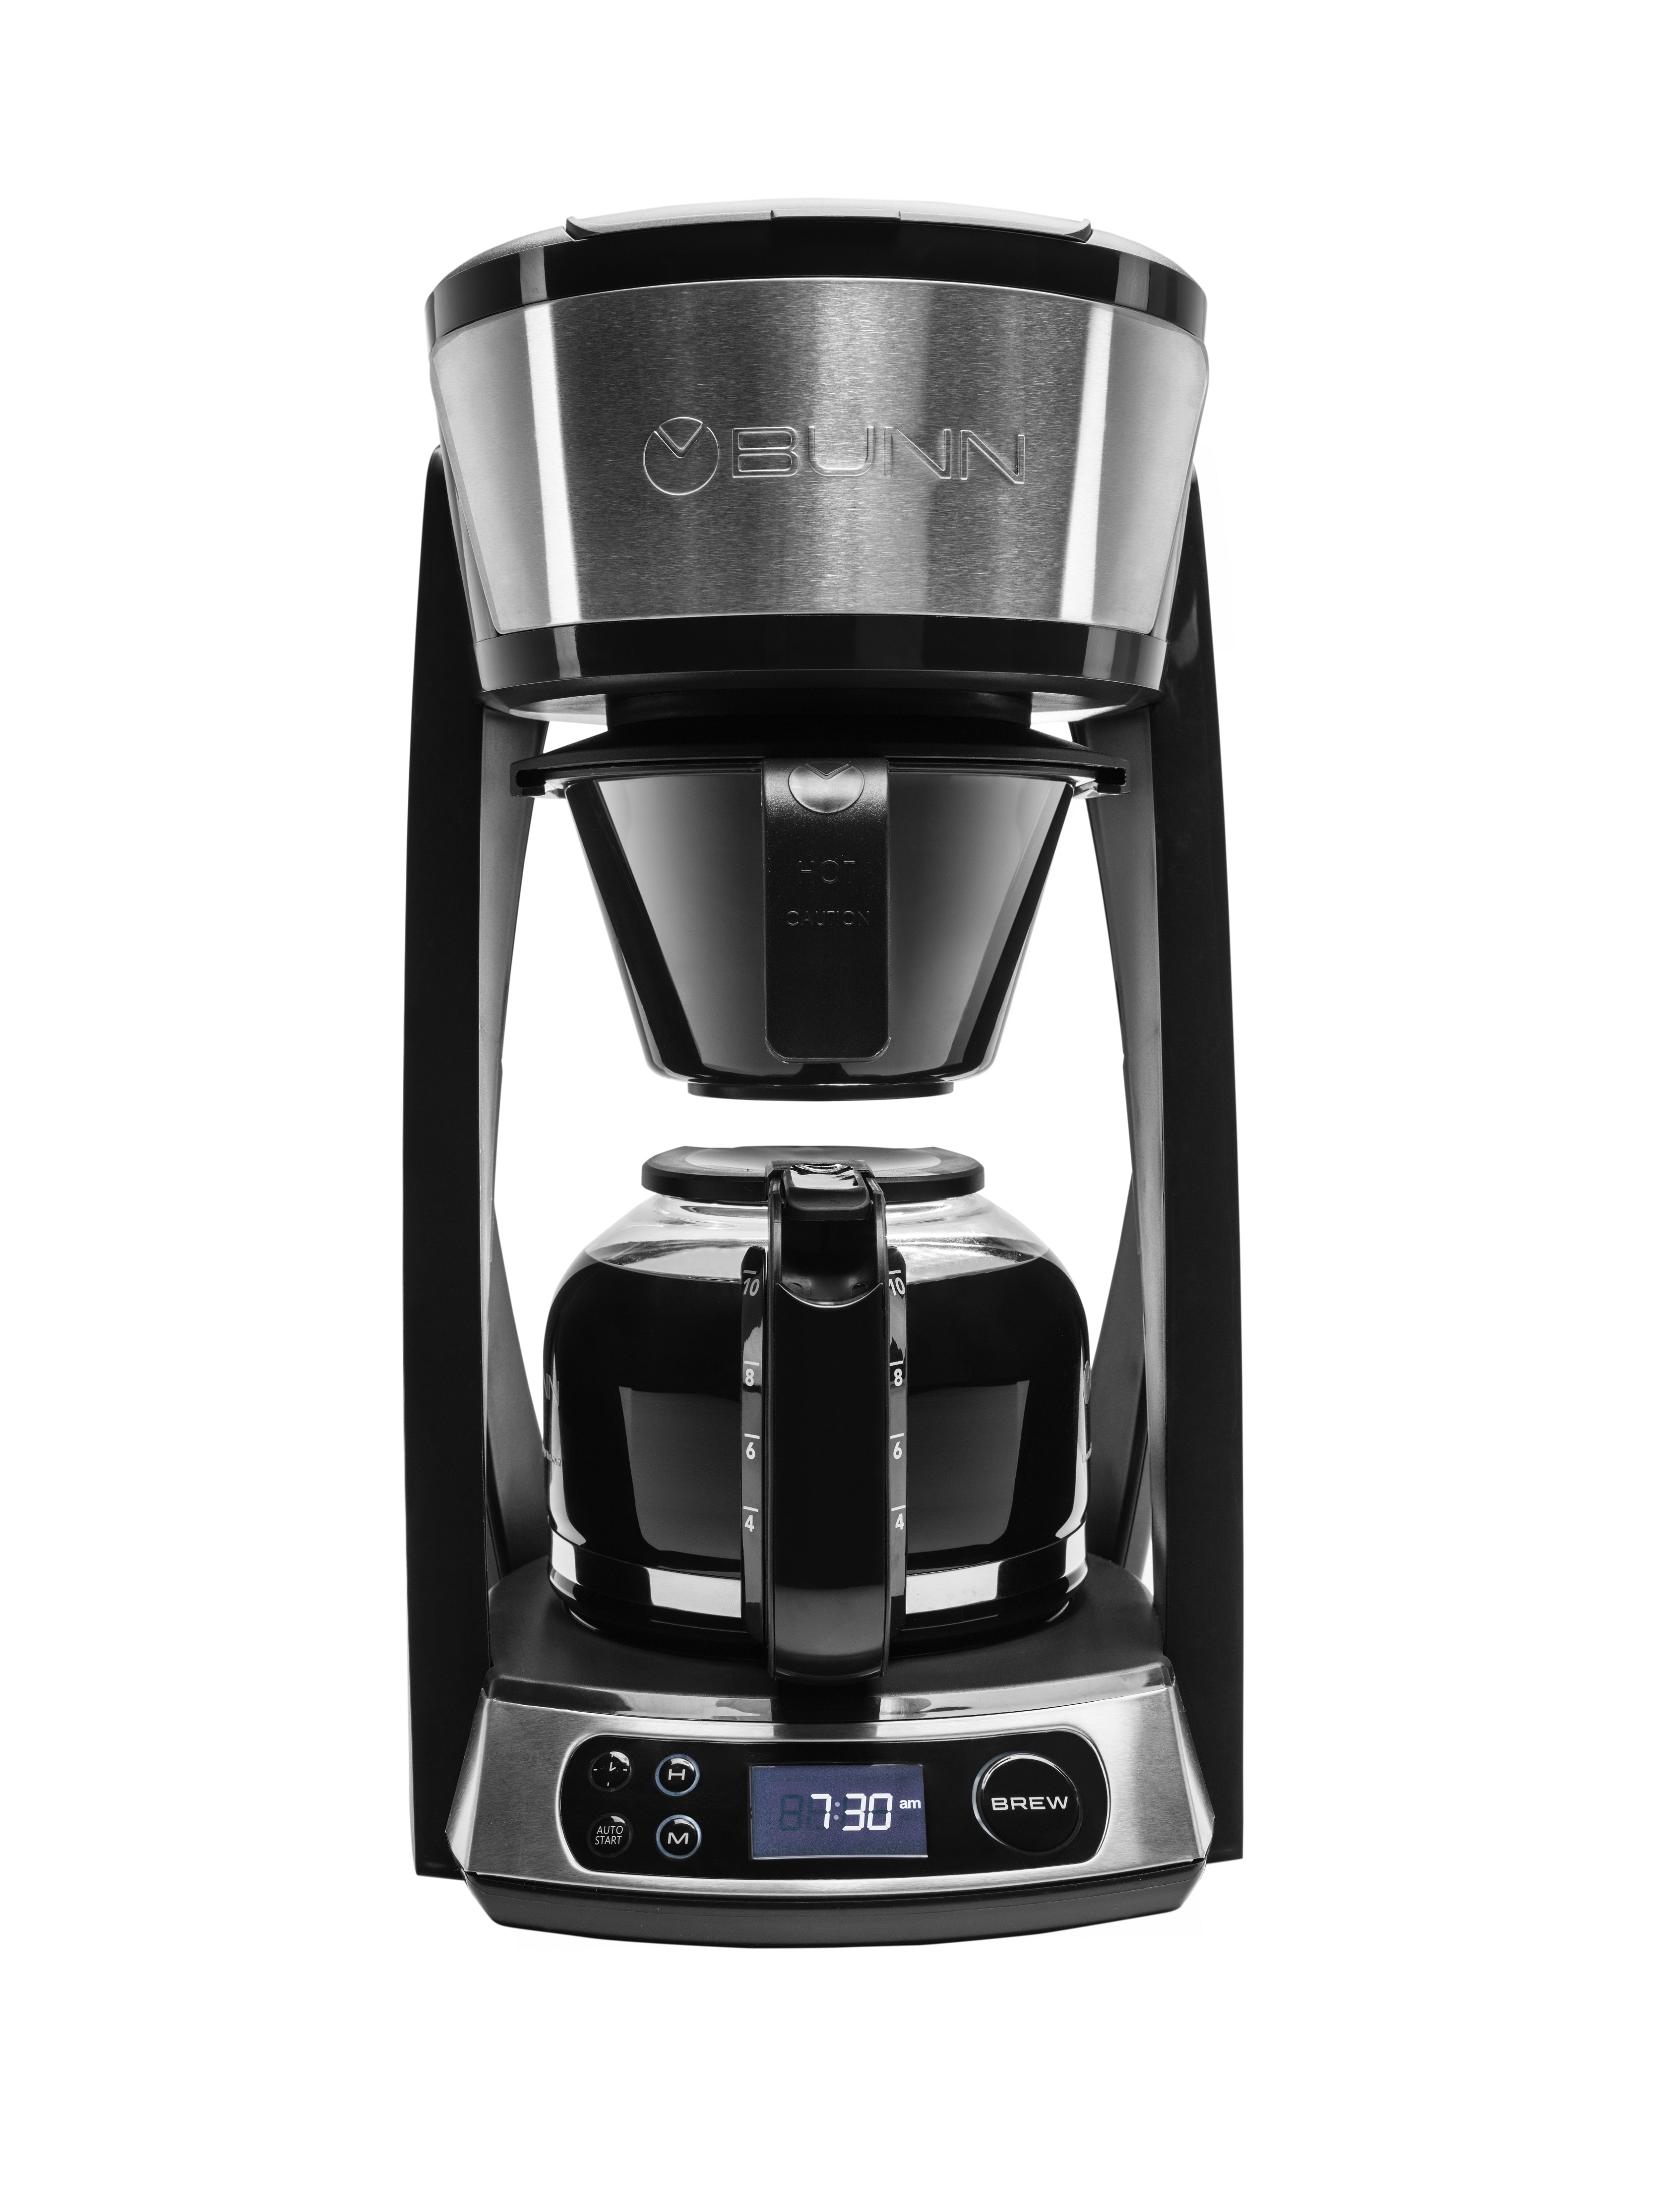  BUNN Heat N Brew Programmable Coffee Maker, 10 cup, Stainless  Steel: Home & Kitchen